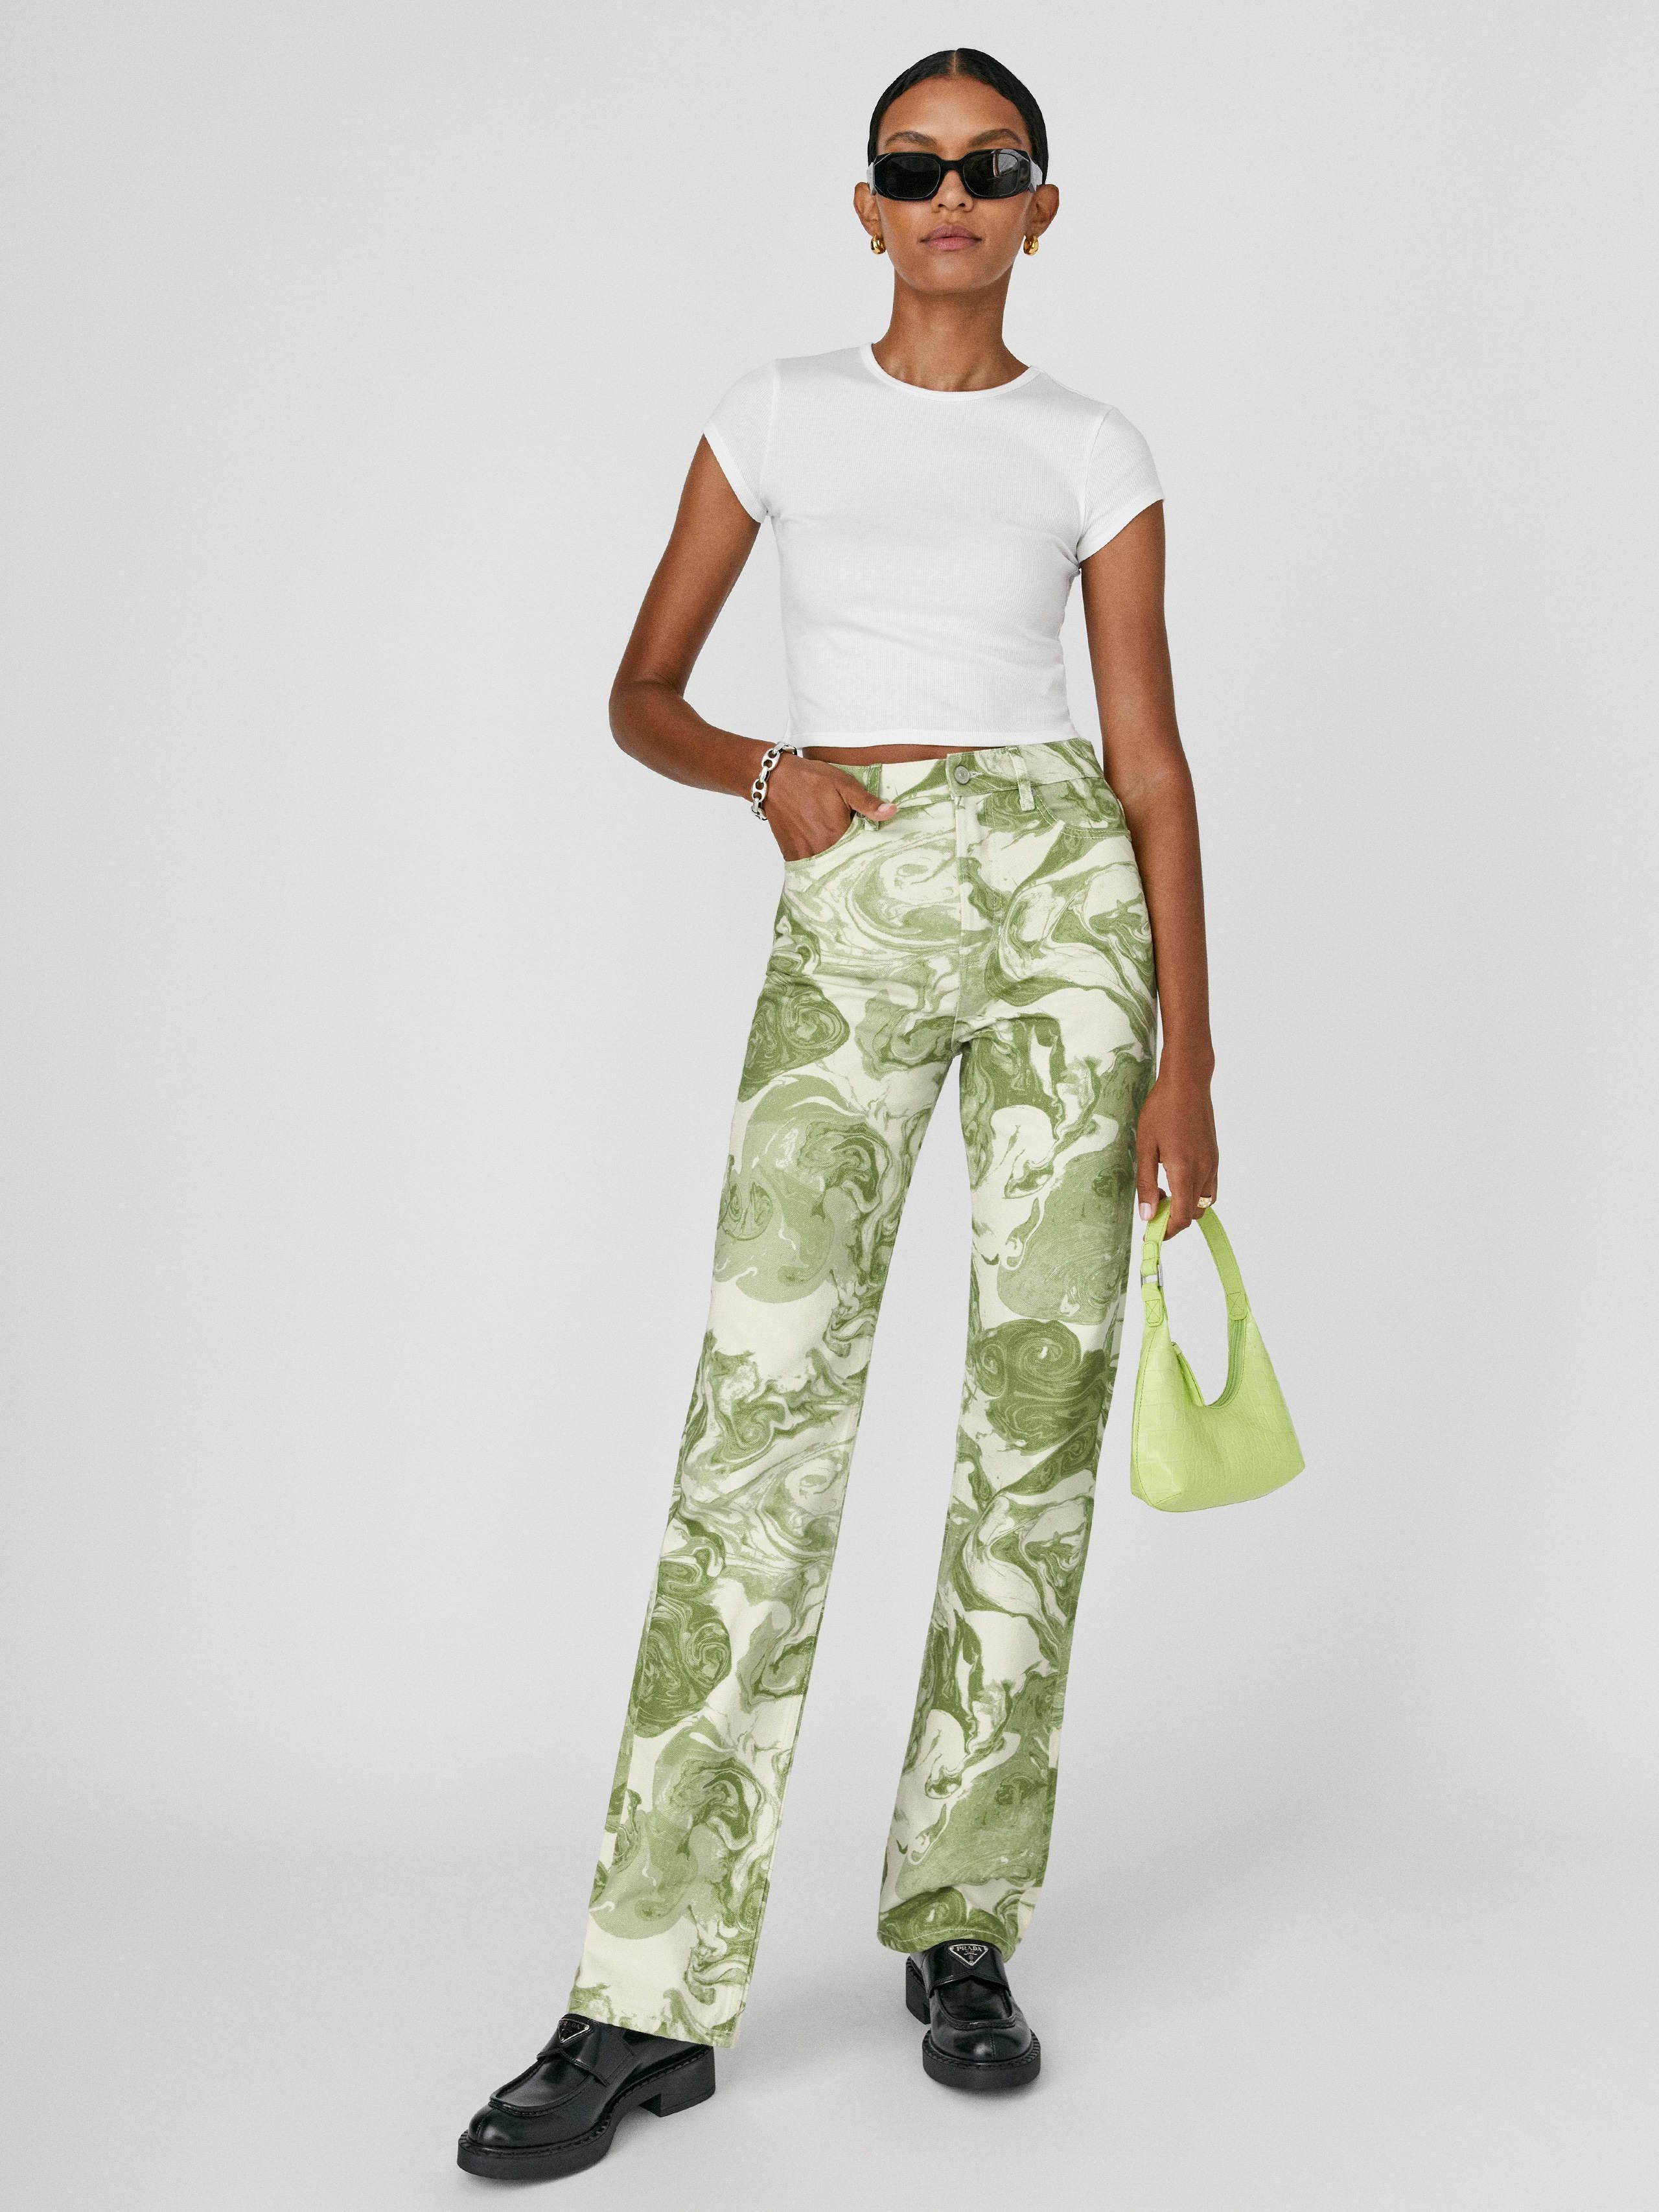 Printed Pants Fall Fashion Trend — For Your Wardrobe - Brit + Co